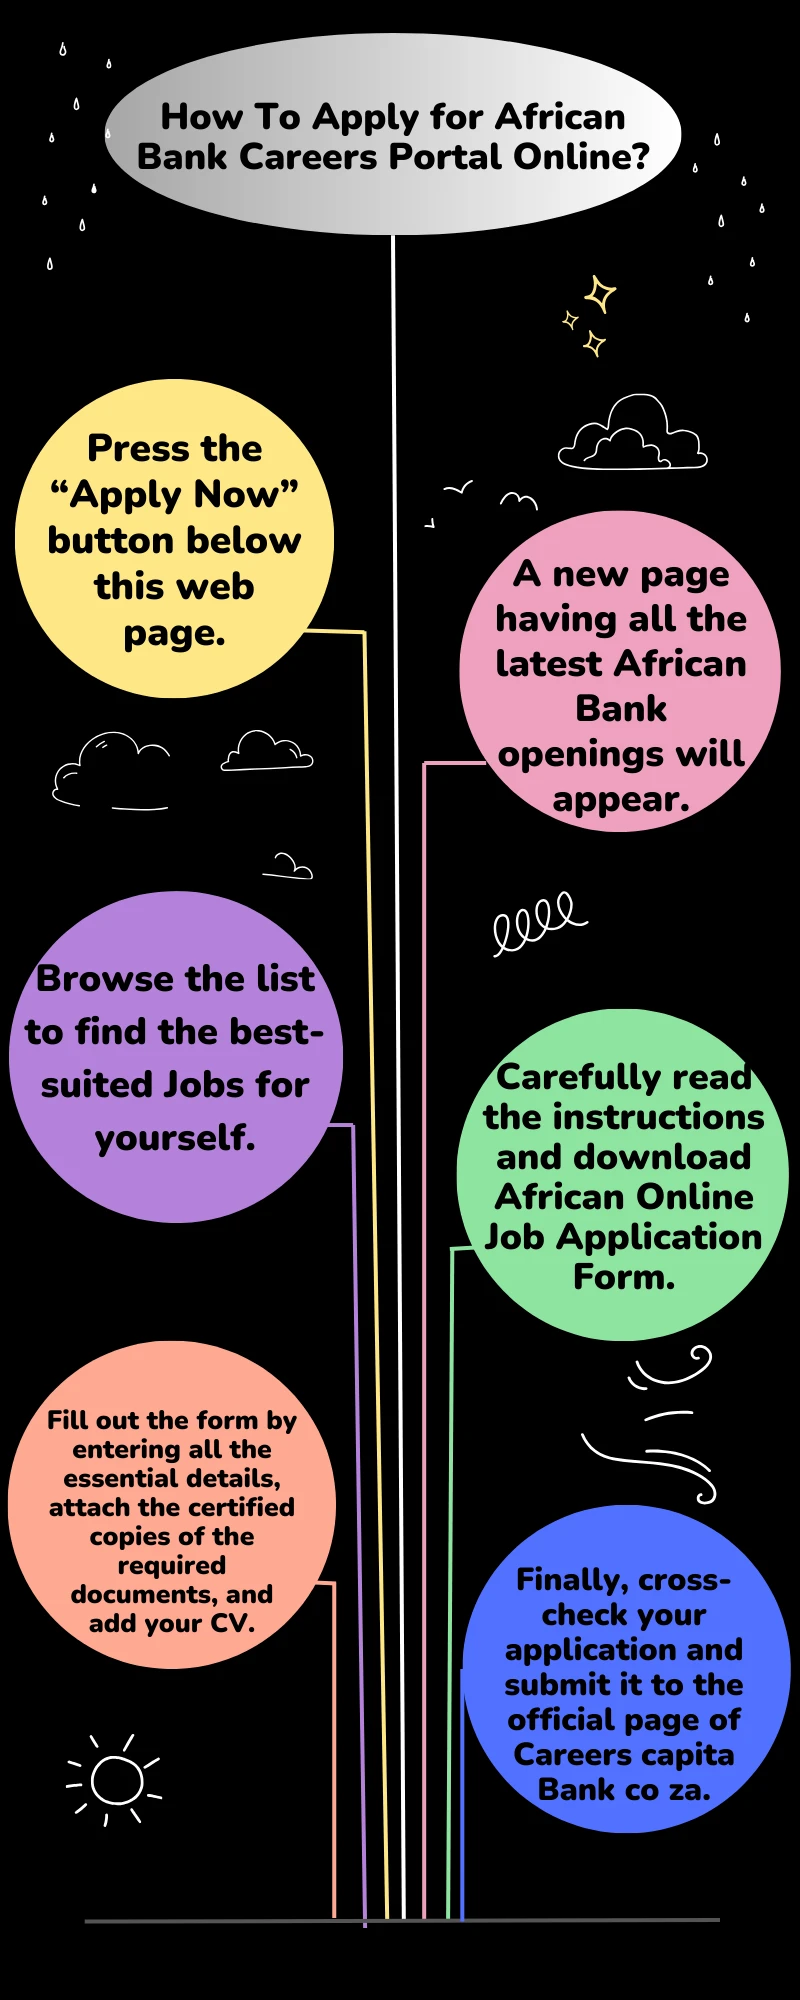 How To Apply for African Bank Careers Portal Online?